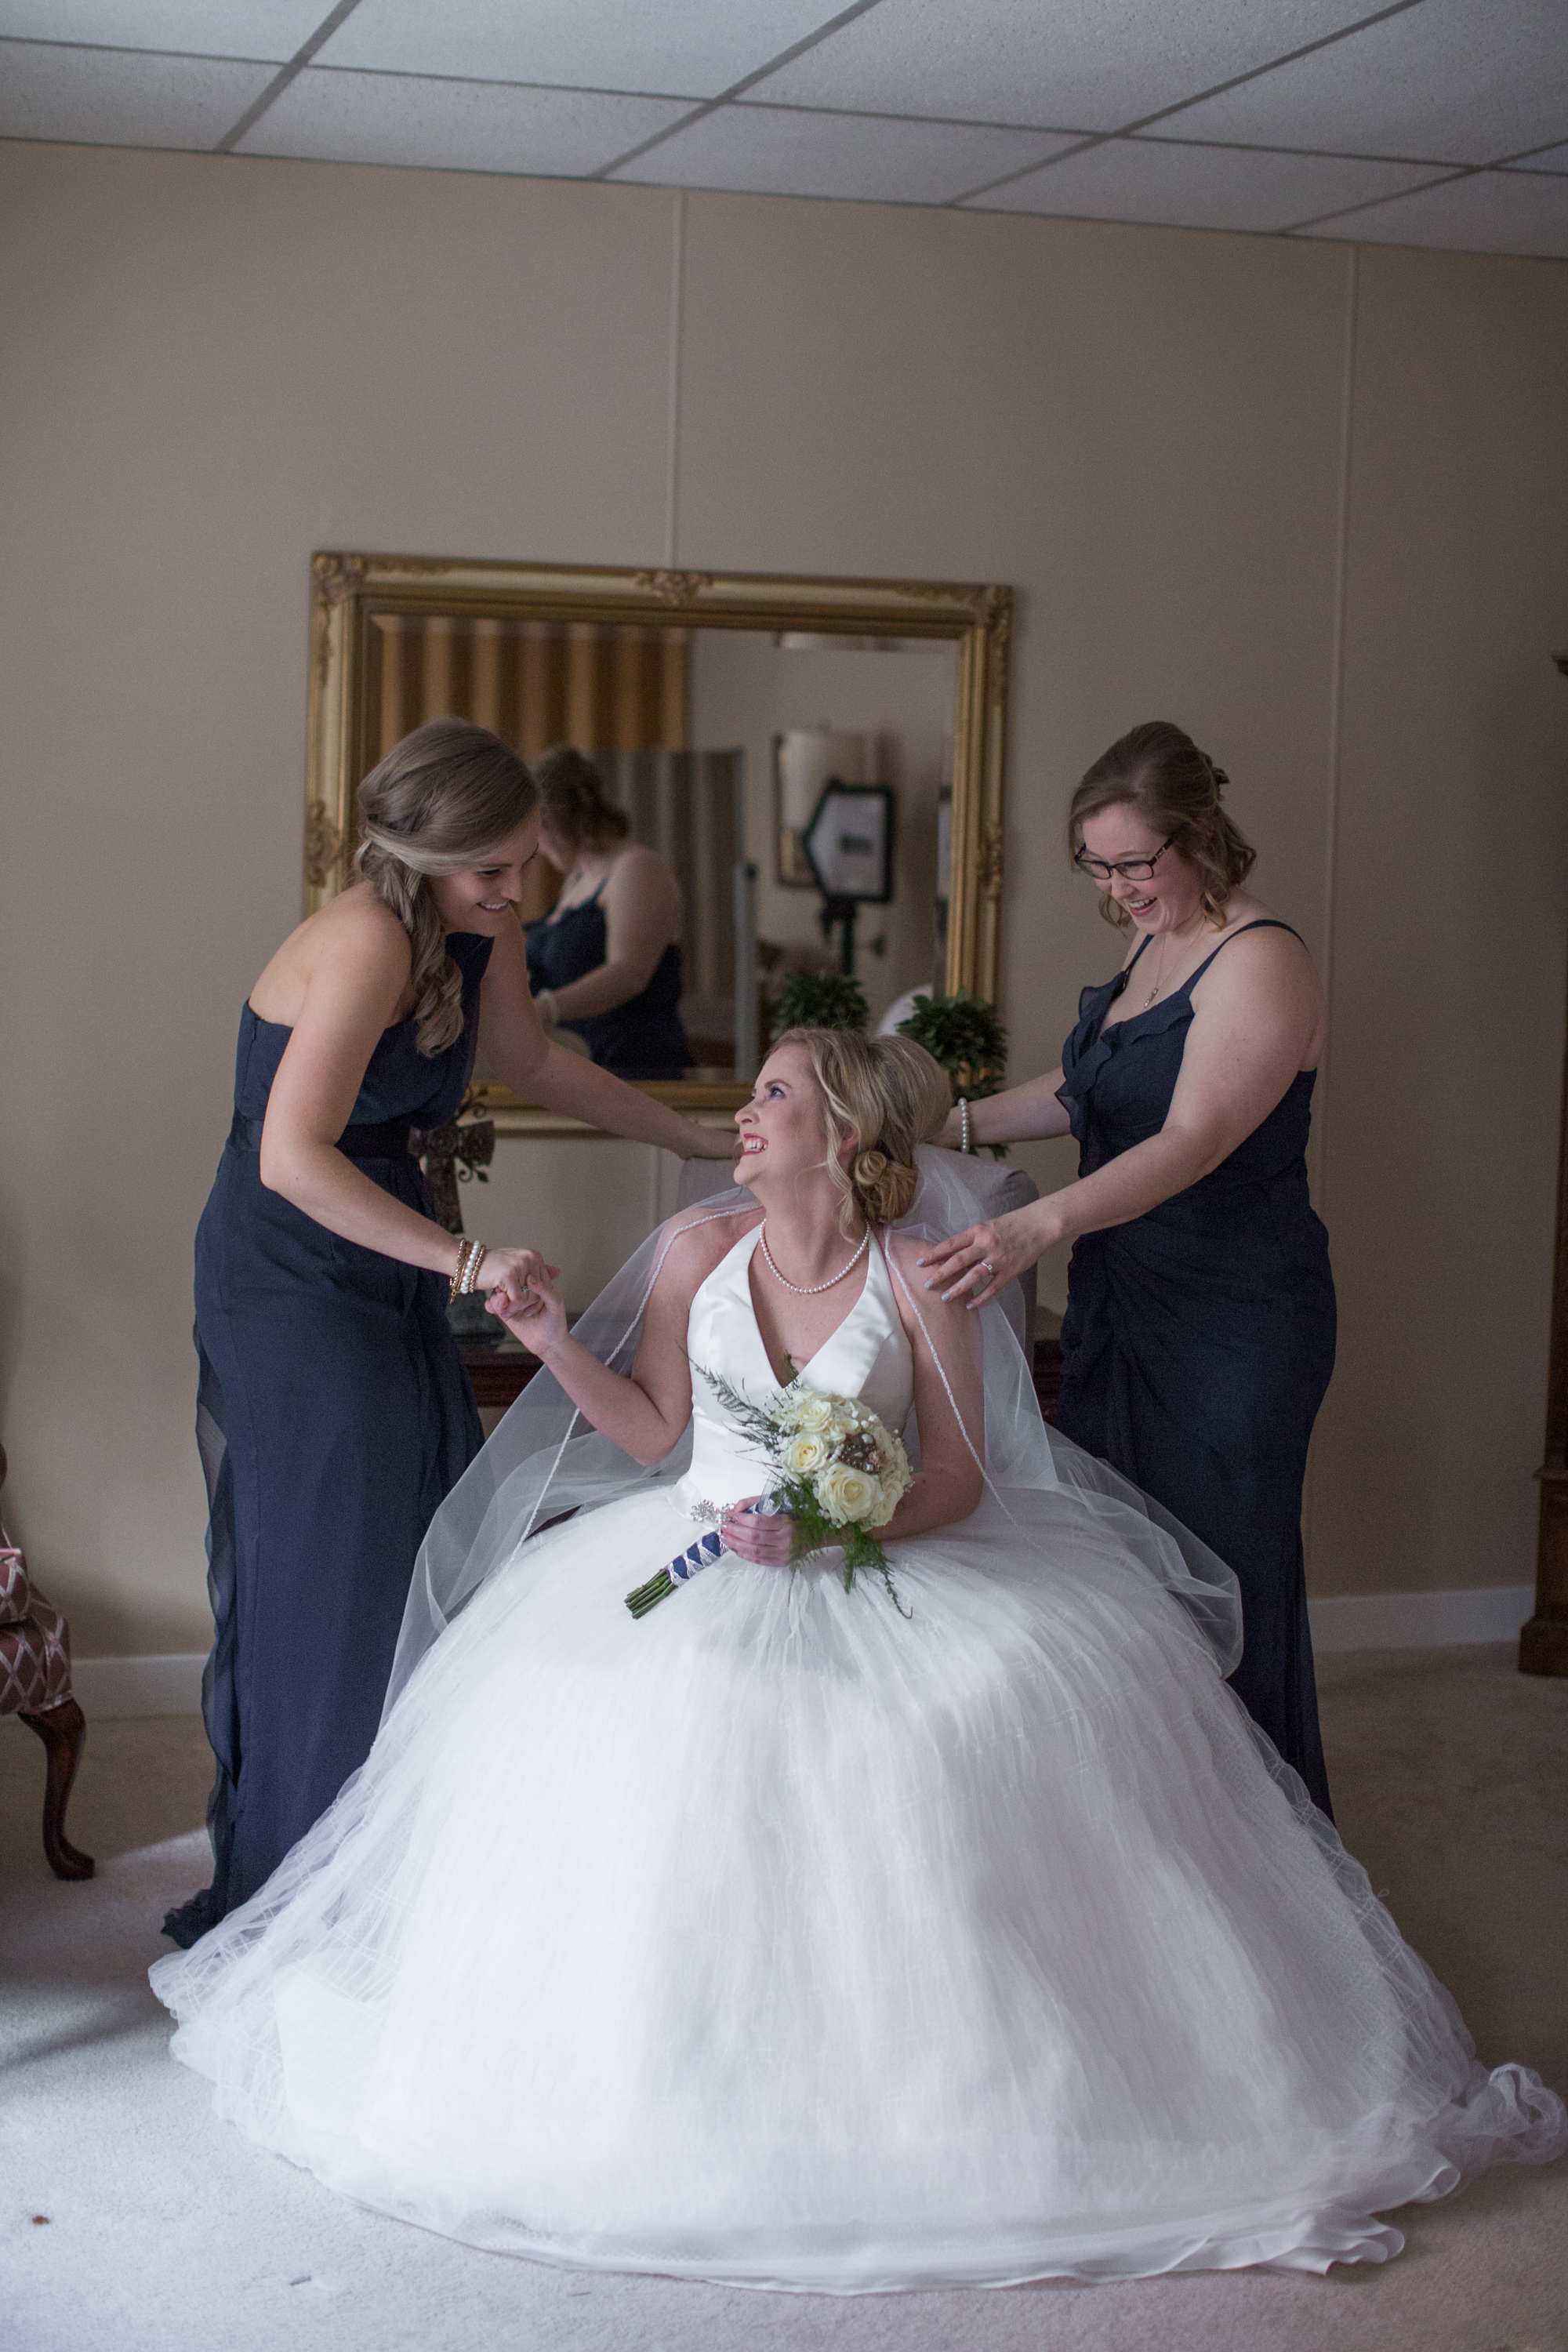  bride-with-bridesmaids-on-wedding-day 